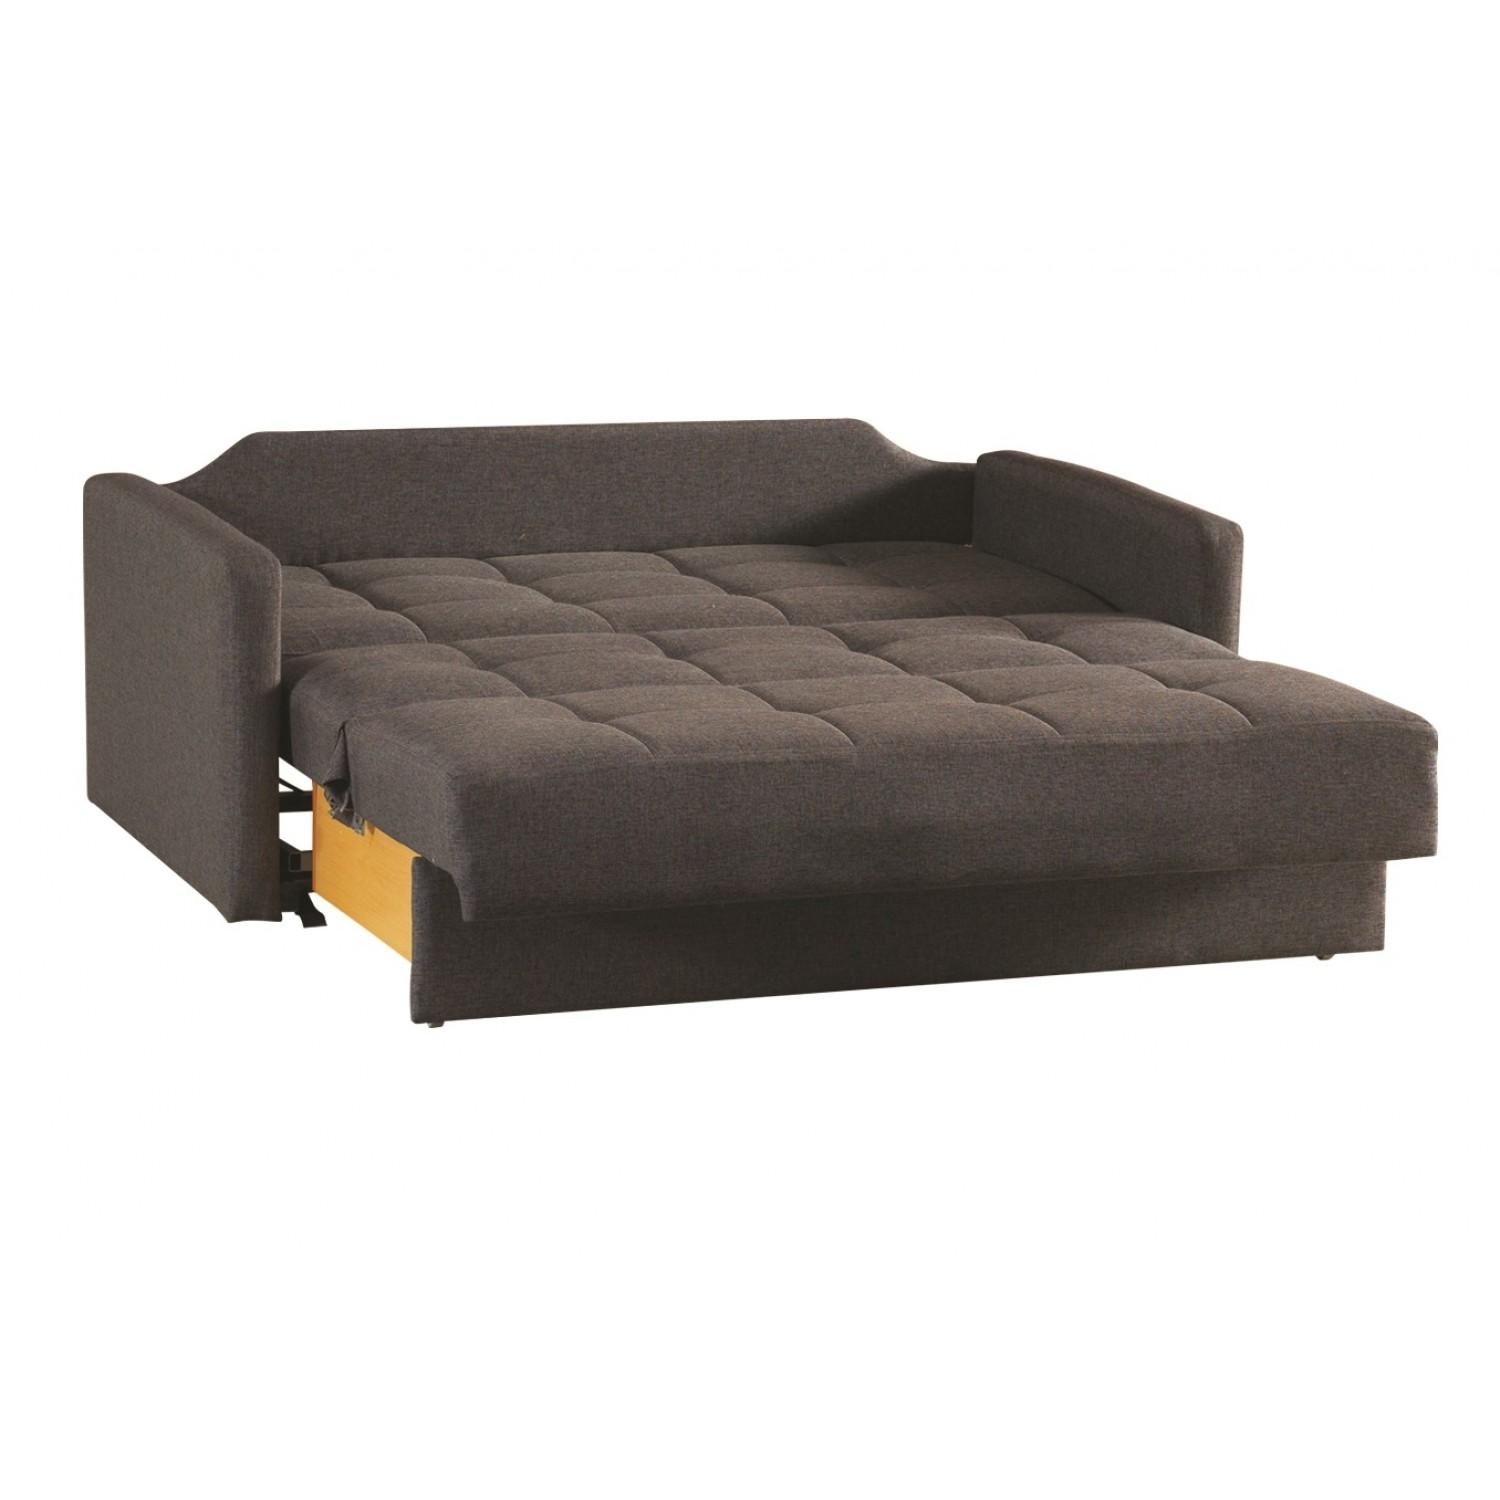 Versatile Modern Sofa Bed For Multifunctional Home Furnishings Within Sofa Beds Queen (View 19 of 21)